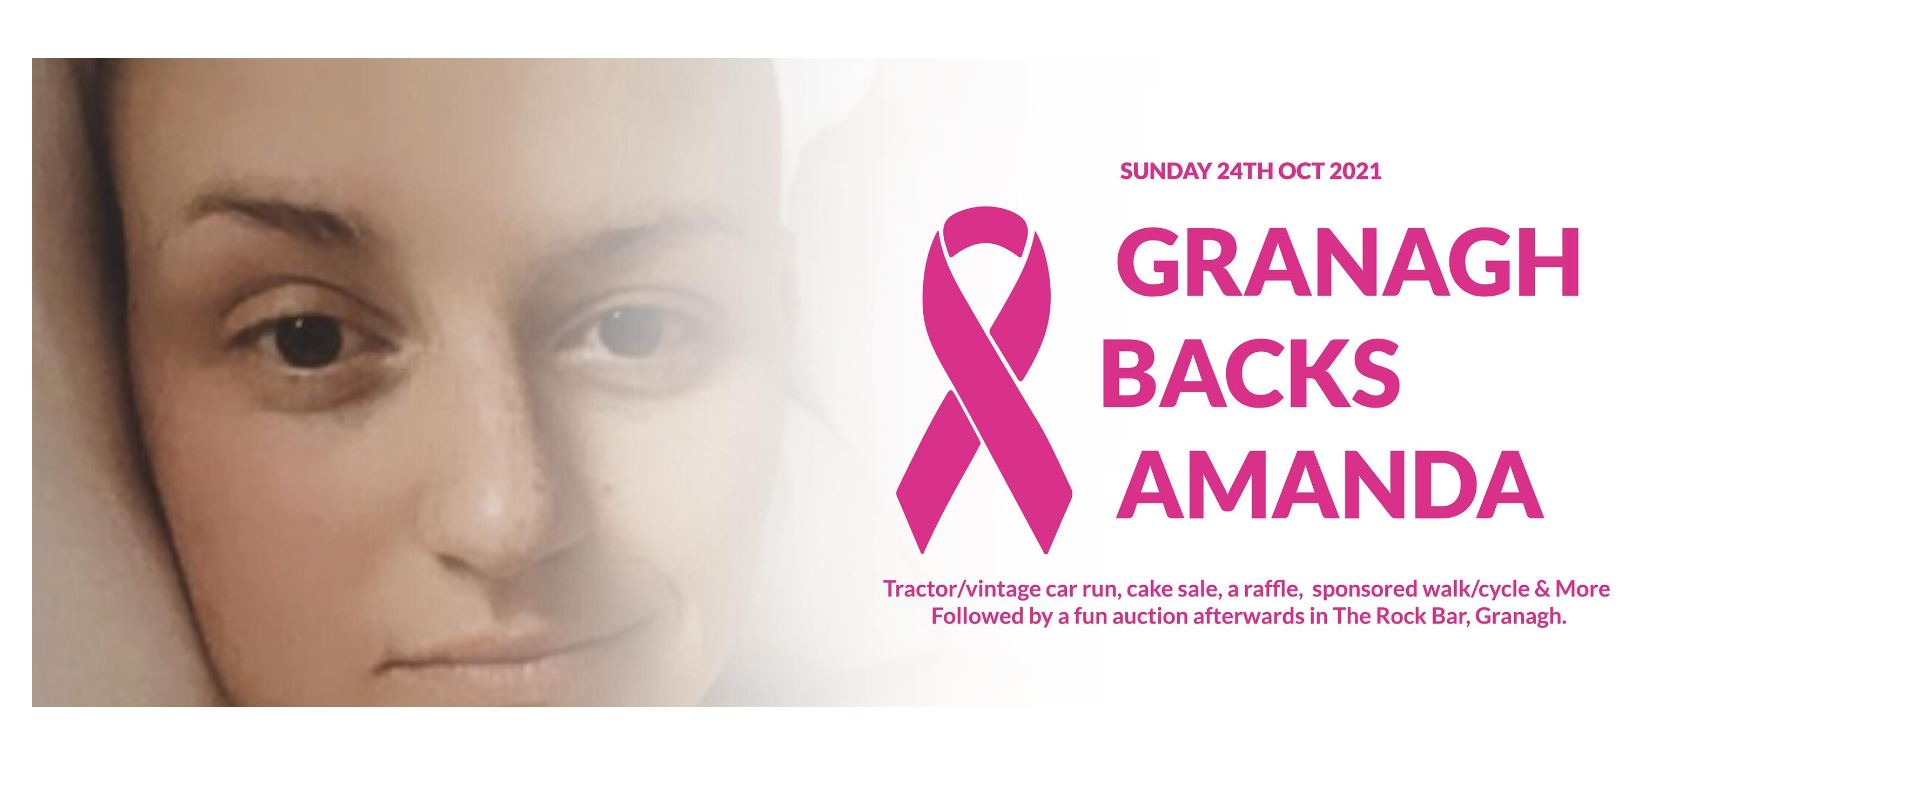 granagh backs amanda Granagh Backs Amanda – Amanda was diagnosed with breast cancer in February 2021